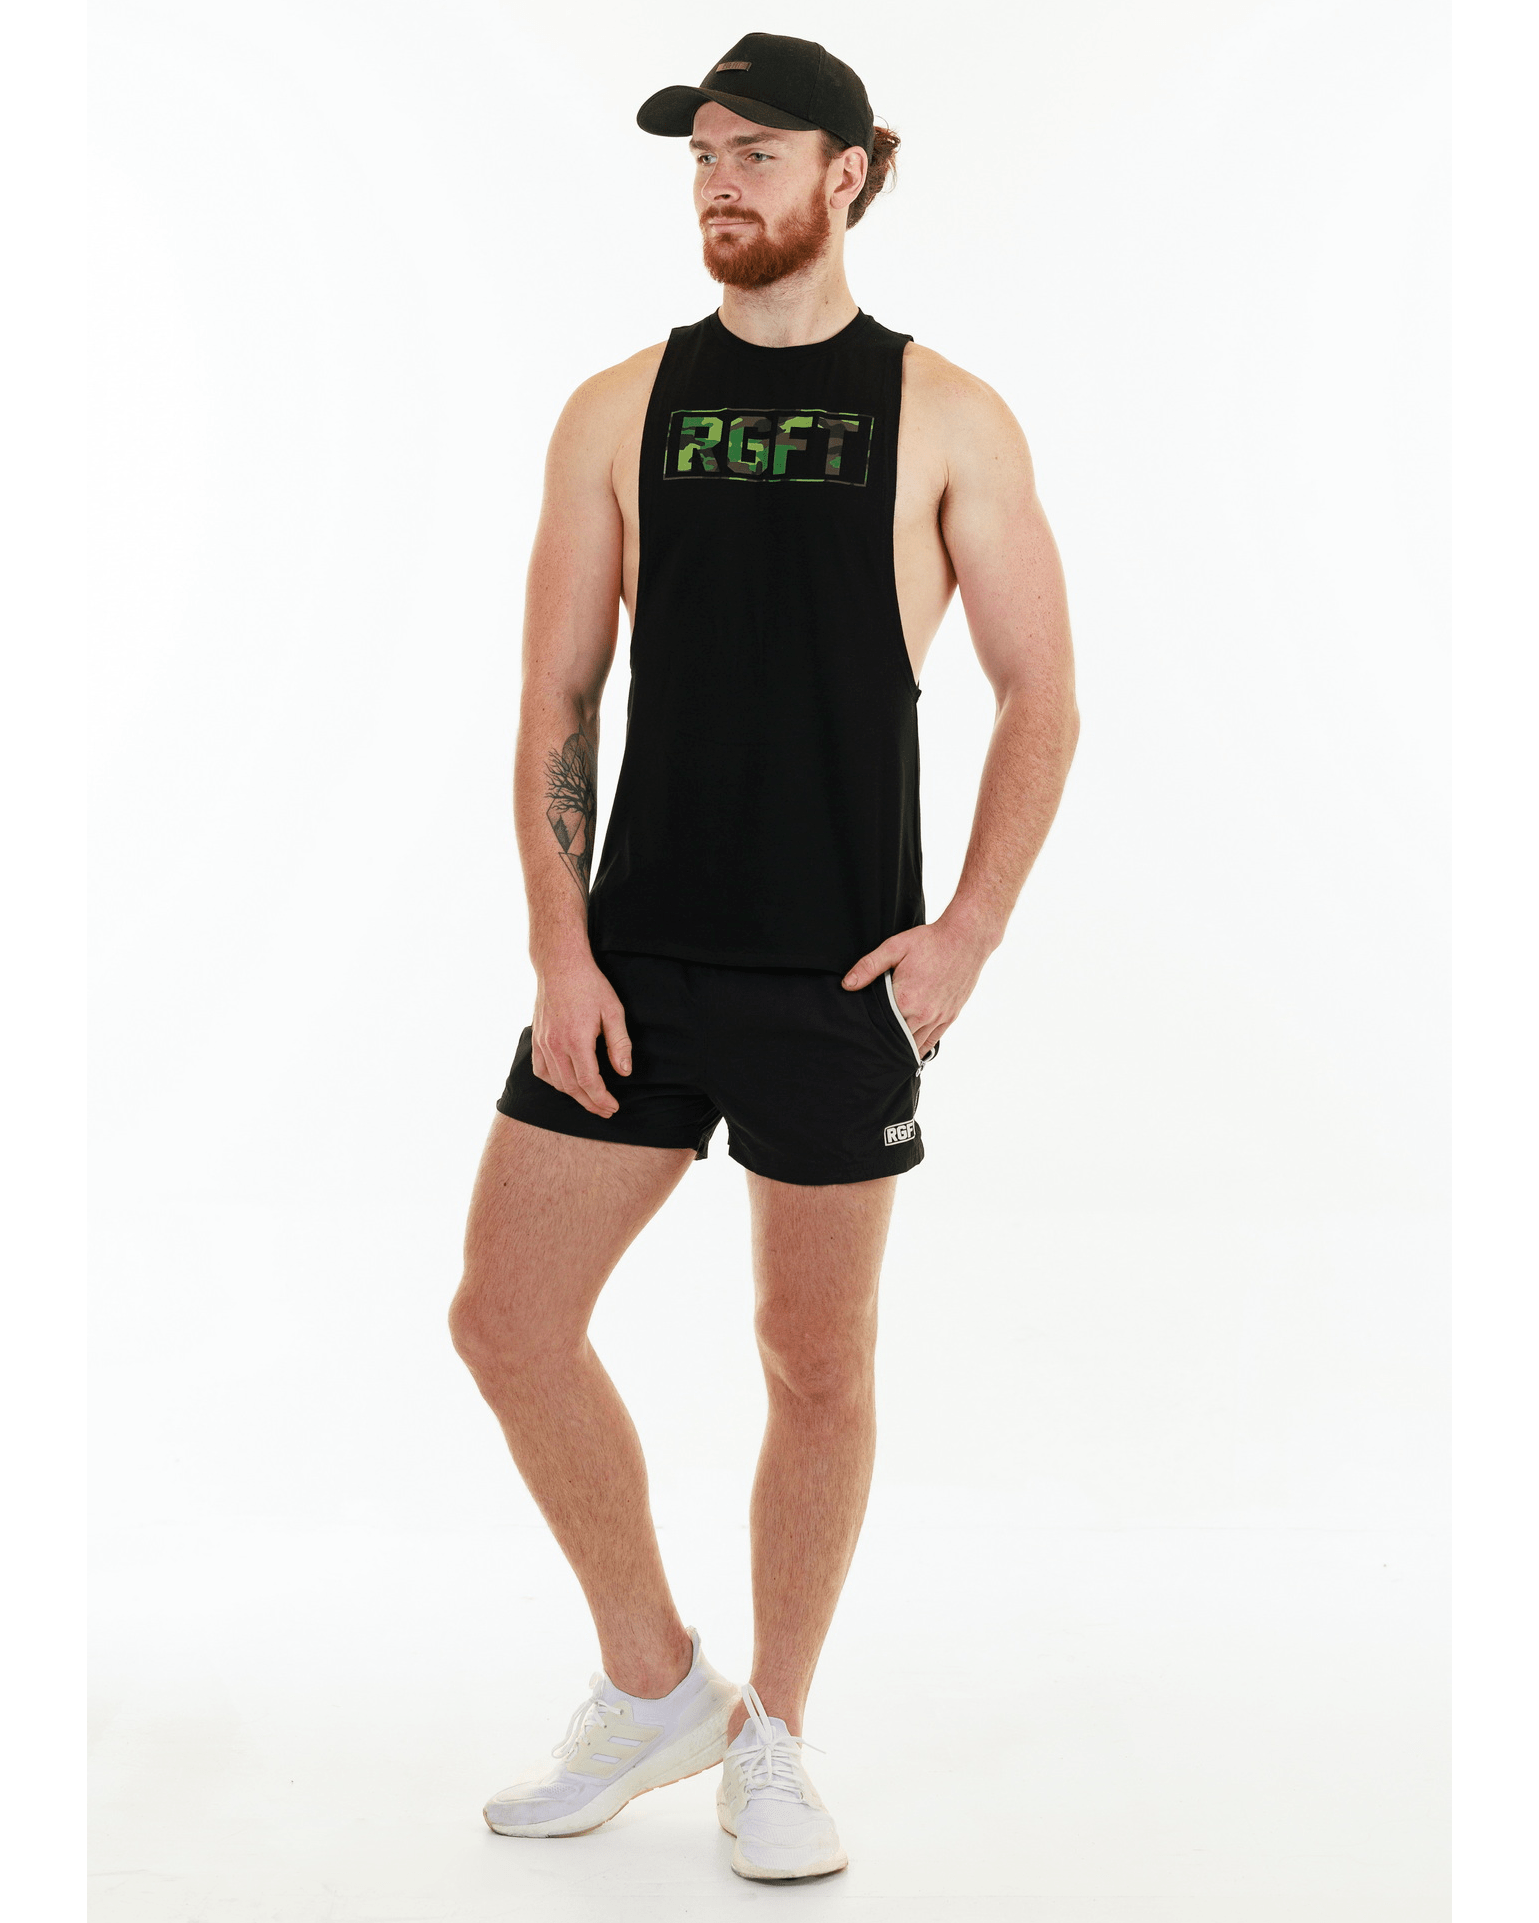 Rig Fit Clothing Tank S'22 Boxed Tank